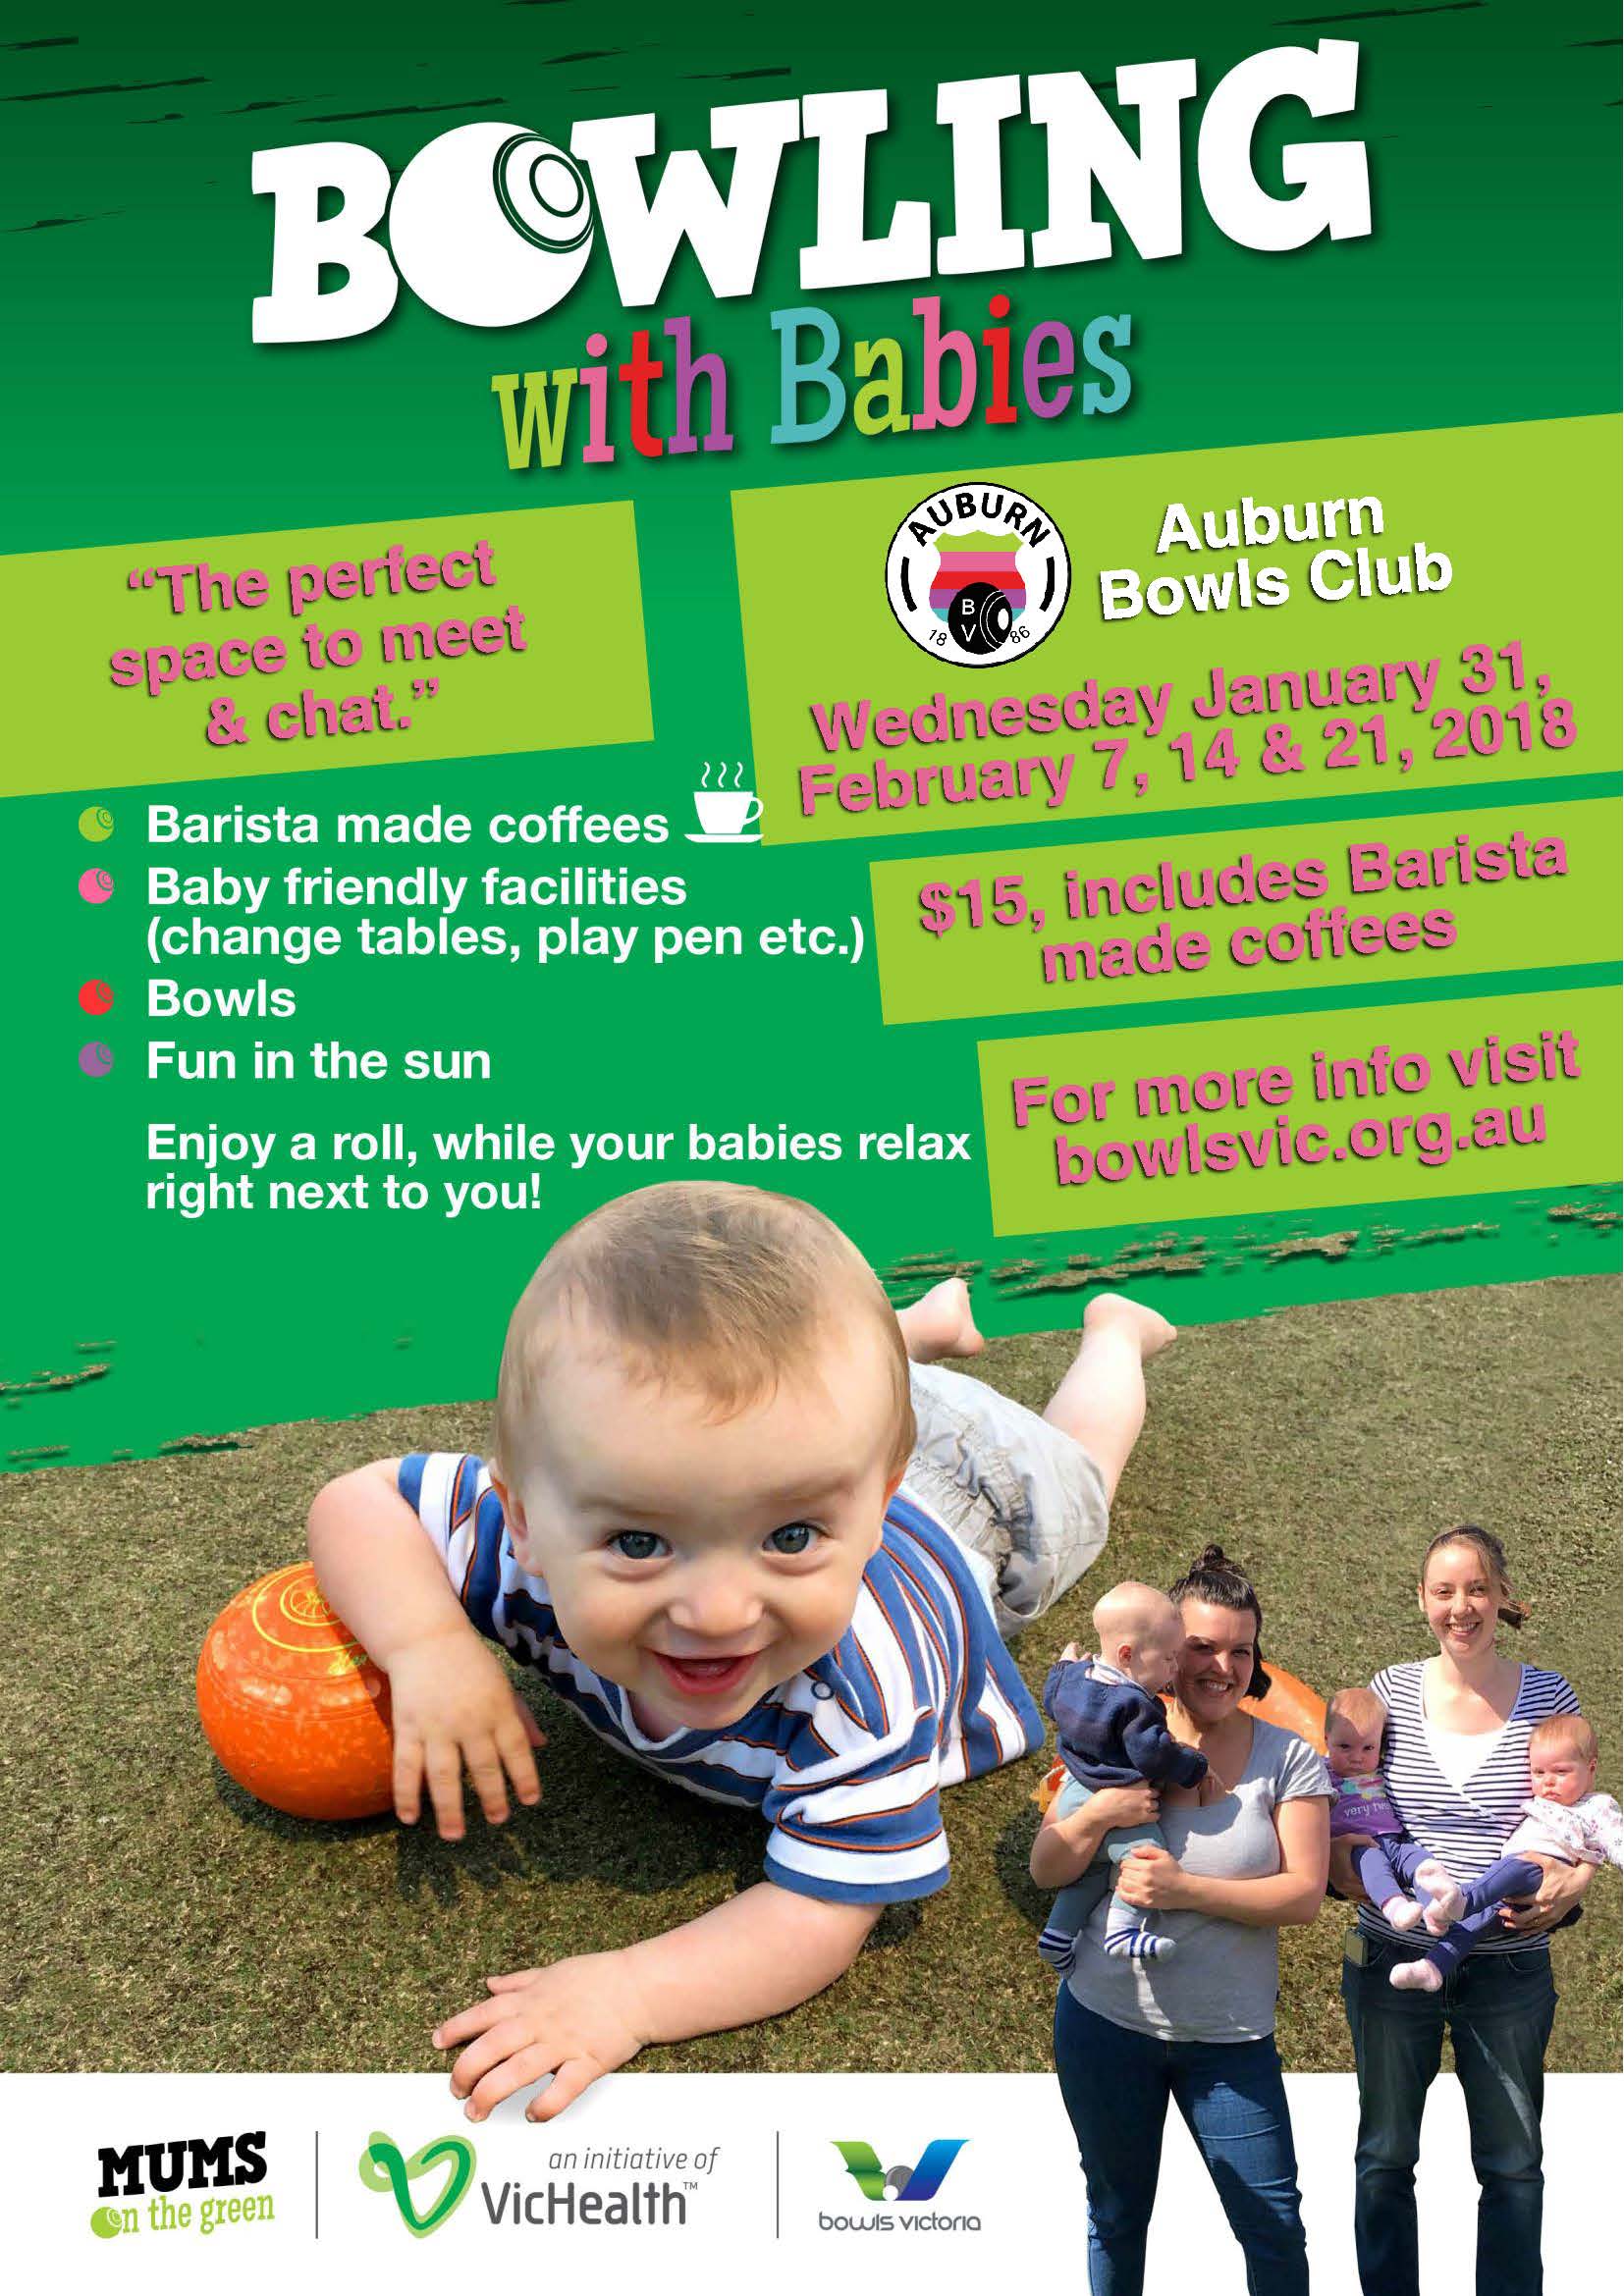 Bowling with Babies is back at Auburn Bowls Club